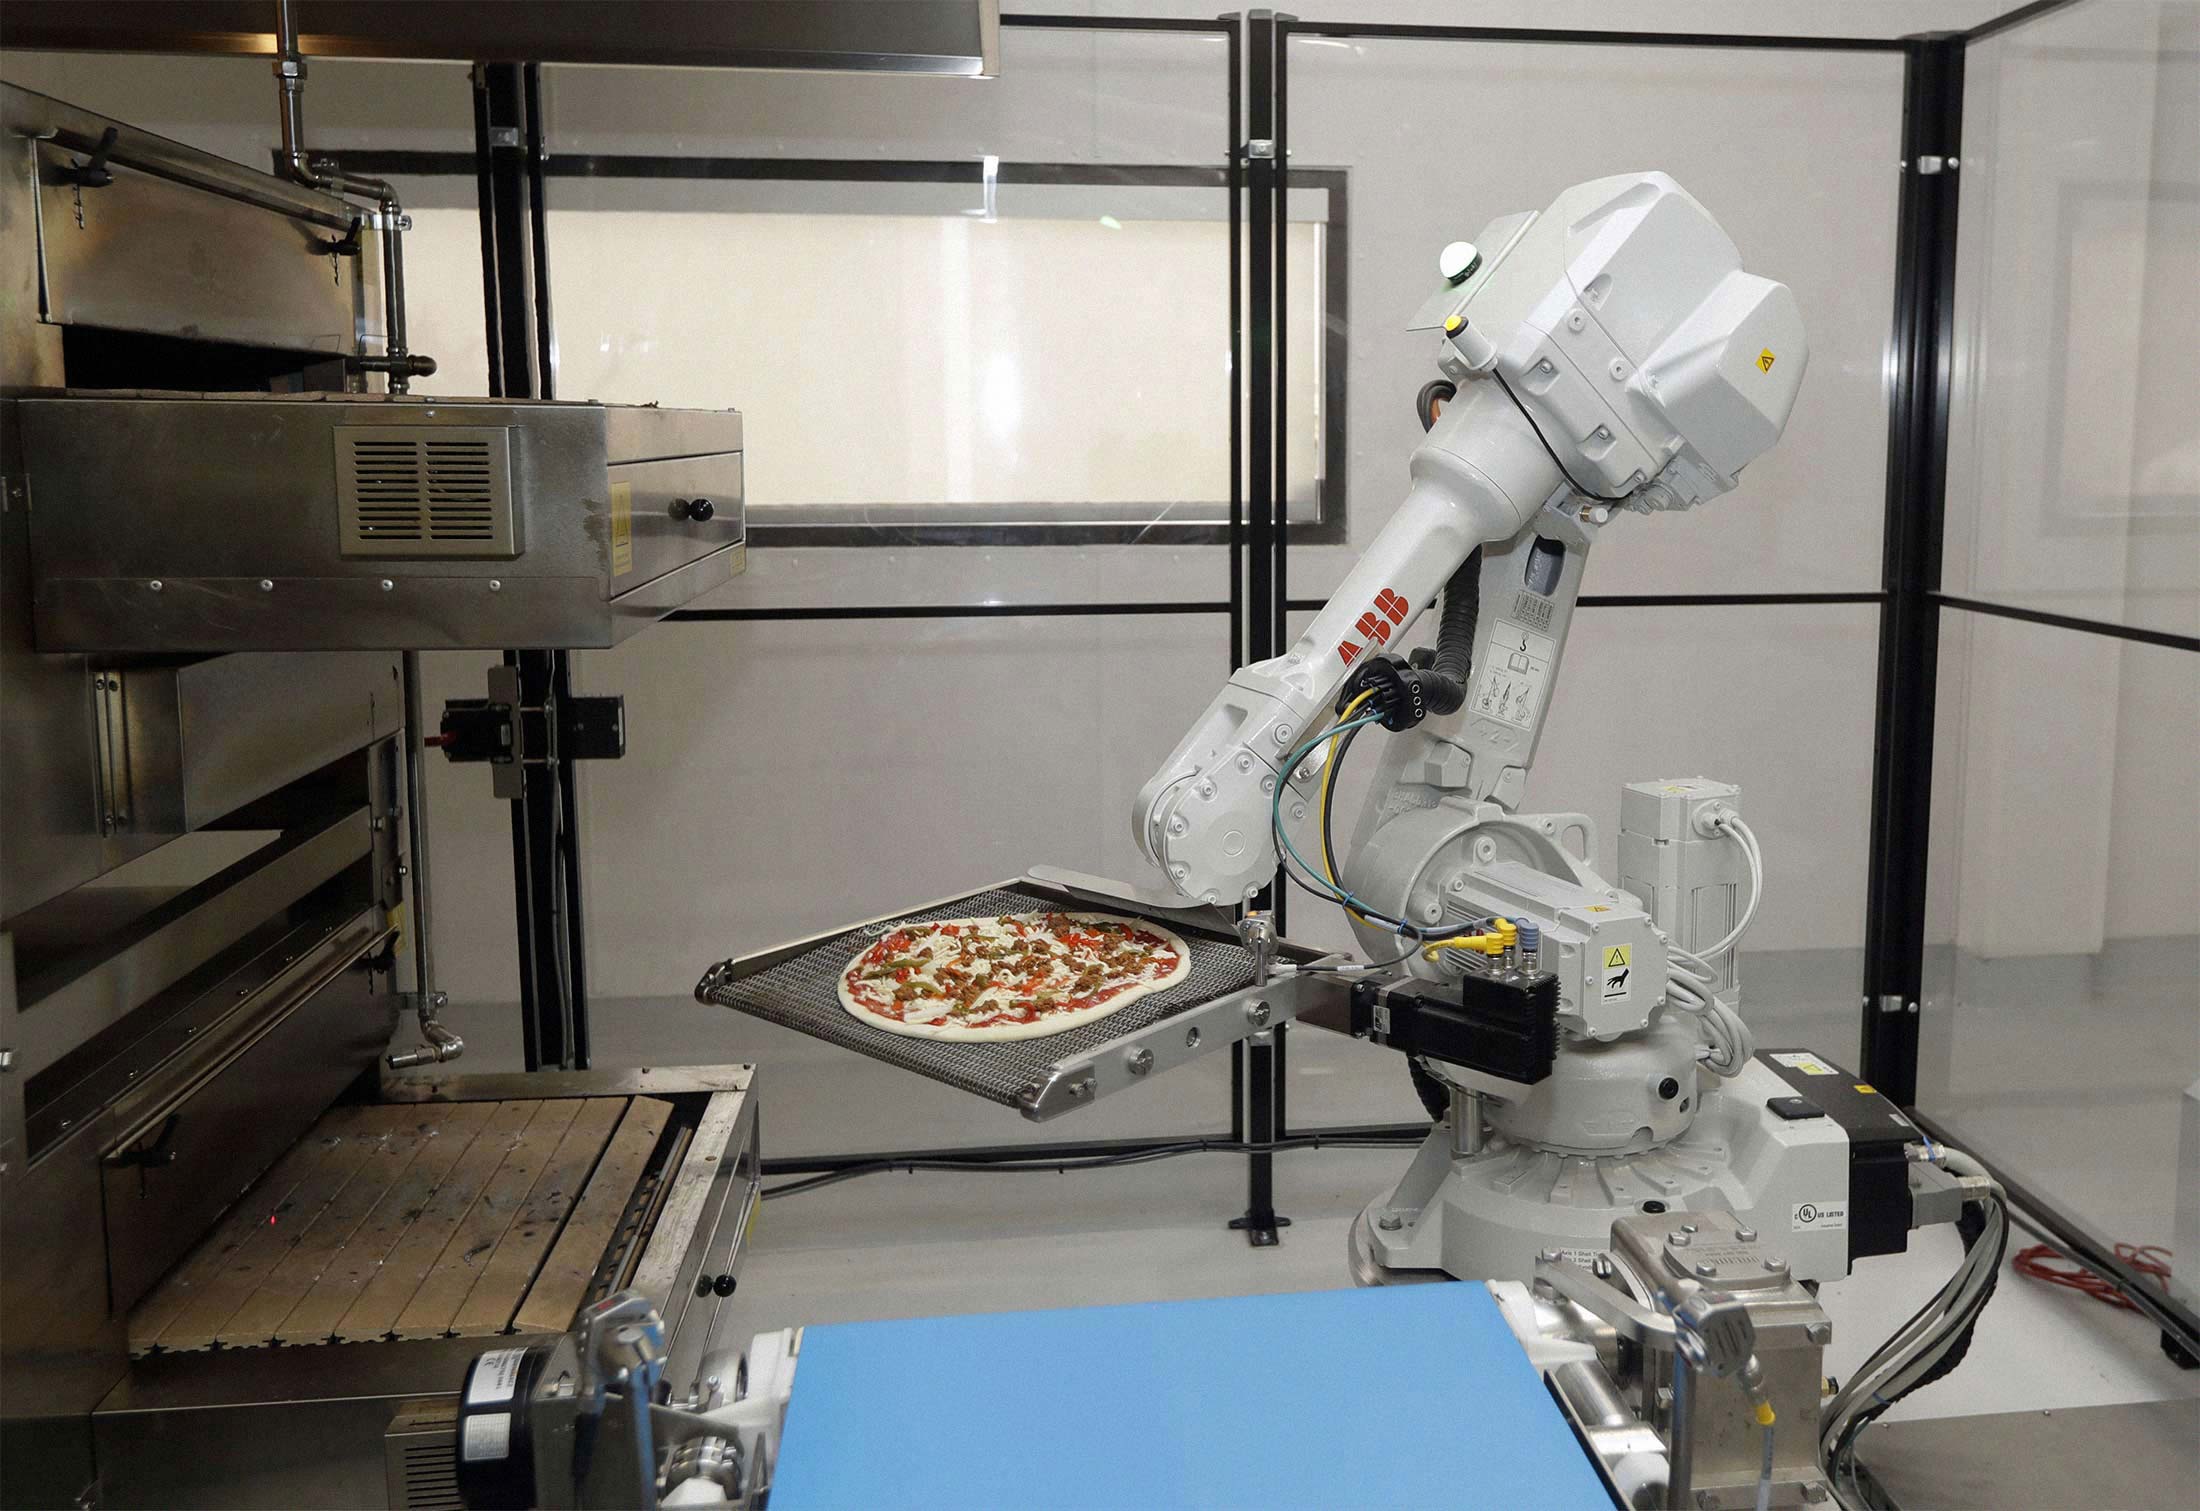 A robot places a pie into an oven at Zume Pizza in Mountain View, Calif., on&nbsp;Aug. 29, 2016.